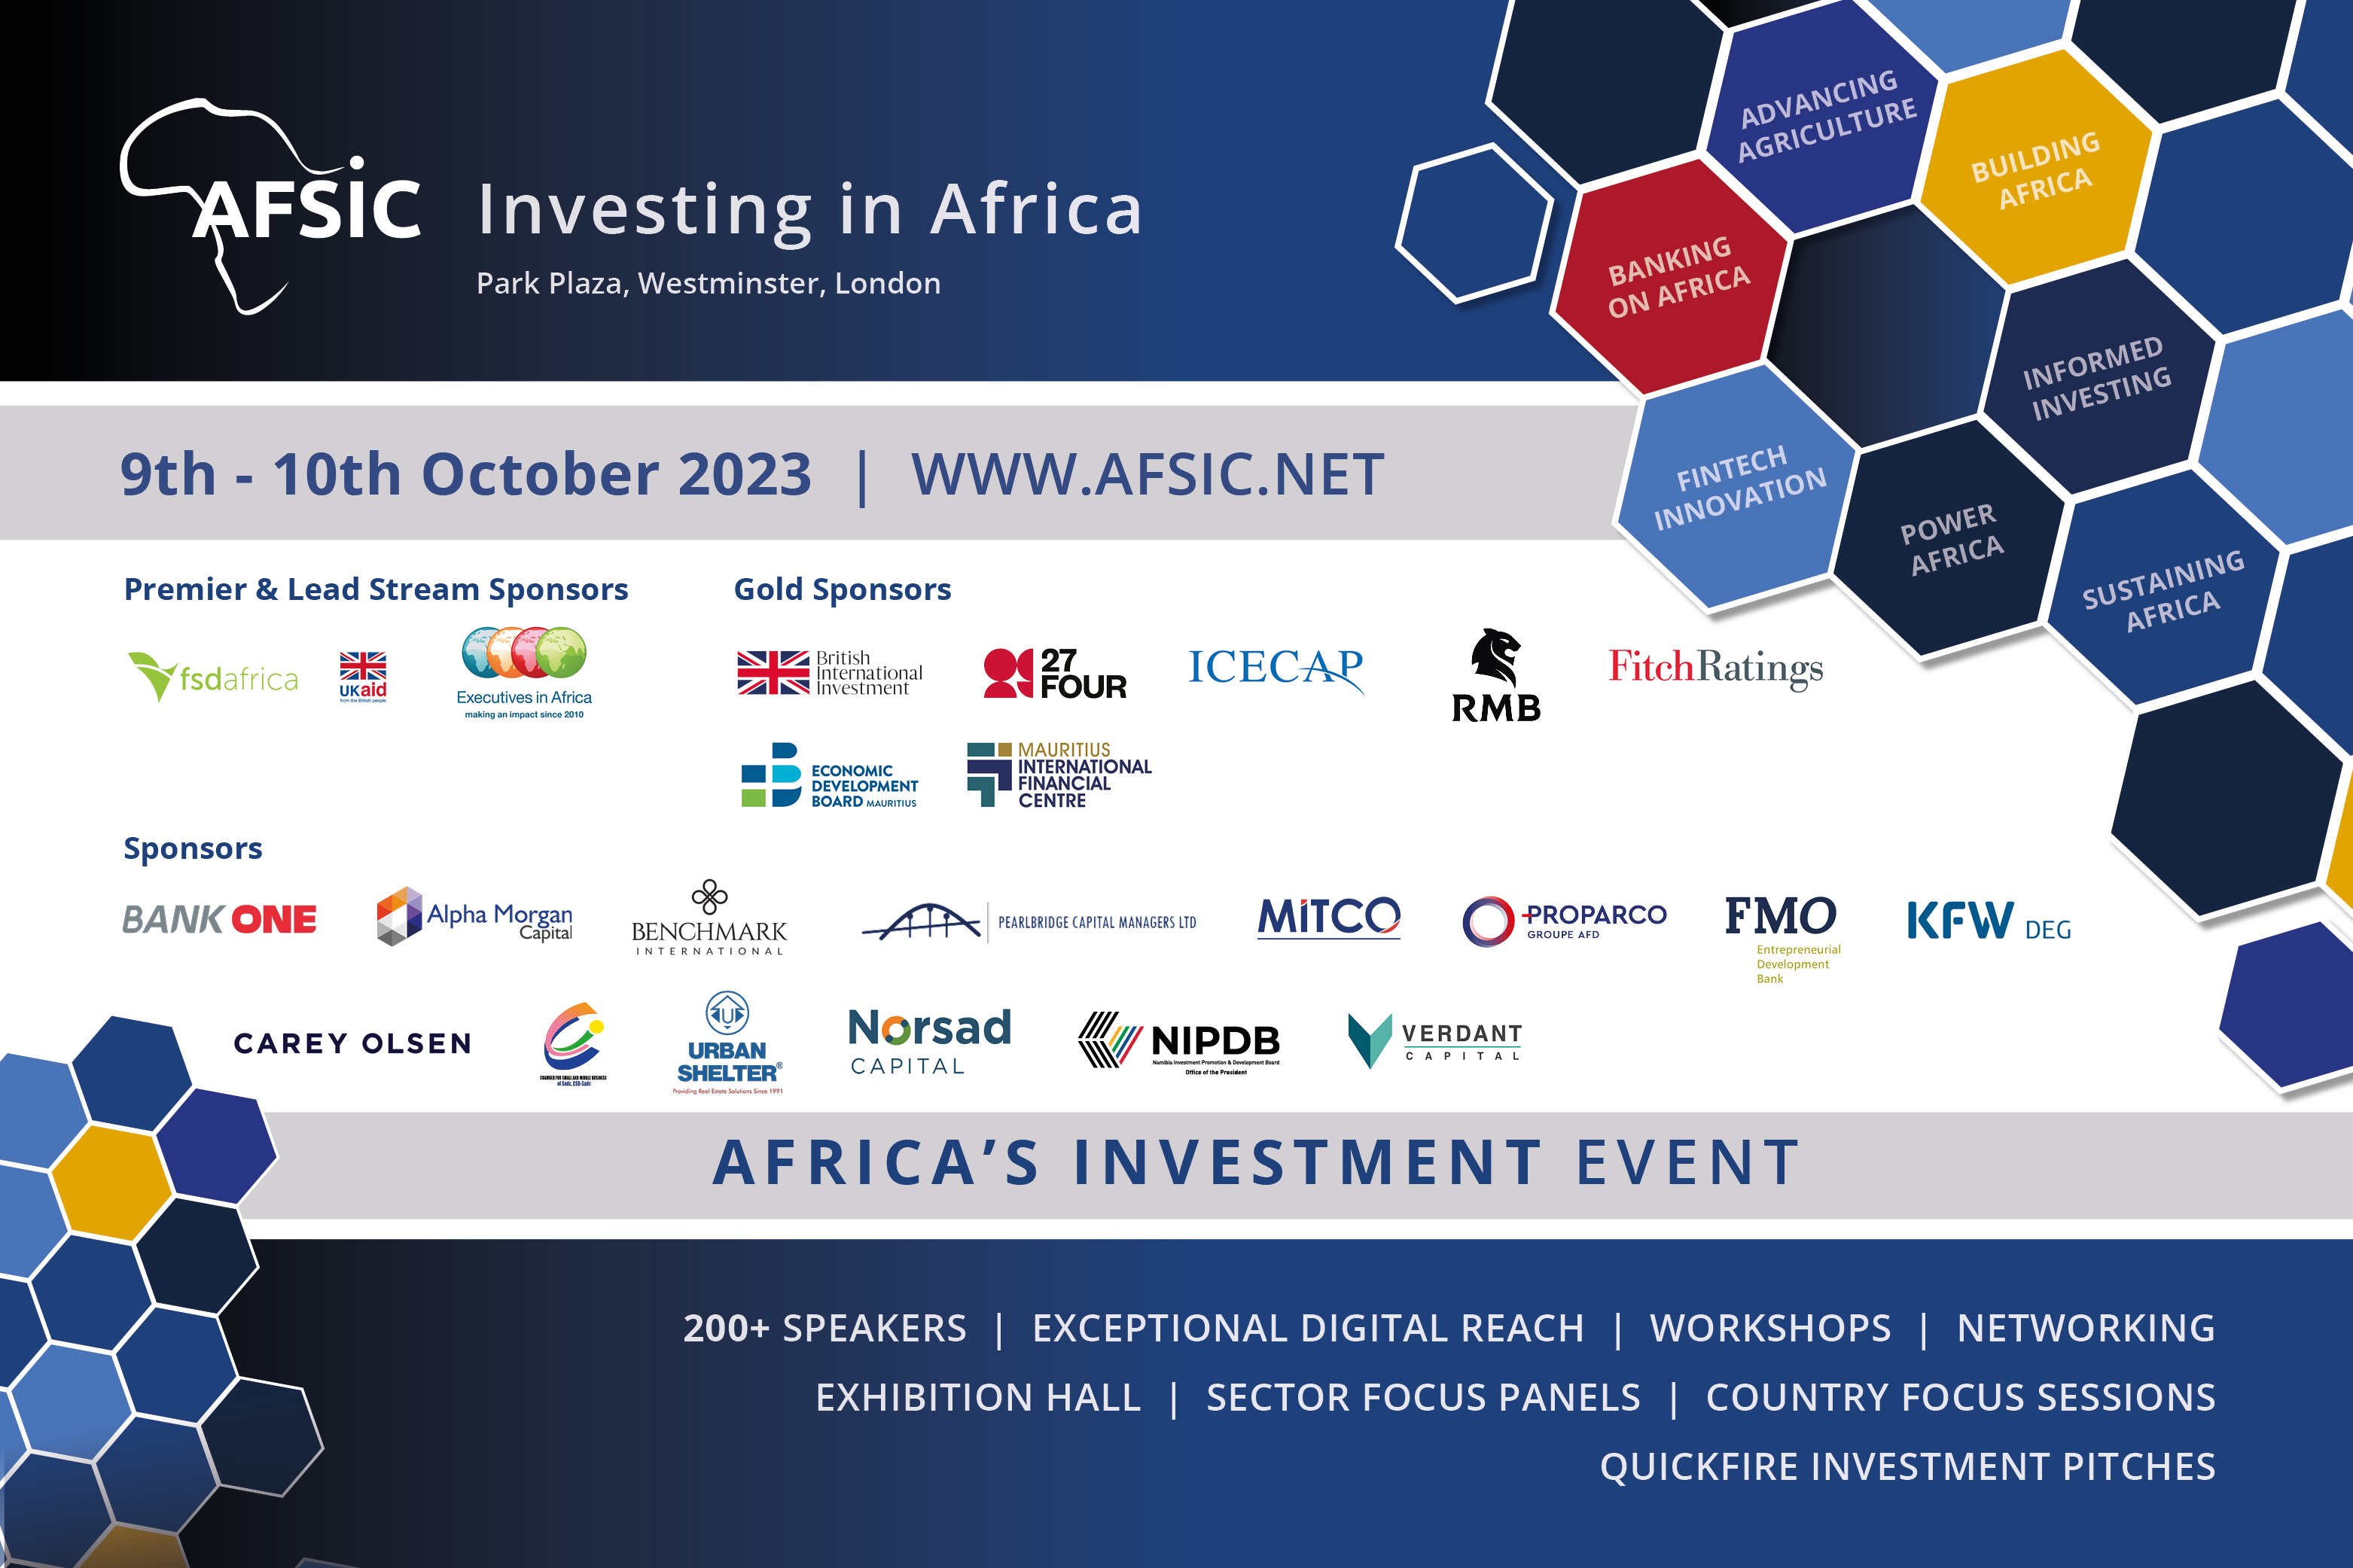 <p><strong>Celebrate AFSIC - Investing in Africa&#39;s 10th Anniversary</strong></p>

<p>Since 2013, AFSIC &ndash; Investing in Africa, is the meeting place for focused networking, discussions and executing investment deals. It has delivered year on year growth and successes for both companies seeking funding with Africa- focused investors and companies wanting to grow globally.</p>

<p>AFSIC &ndash; Investing in Africa continues to drive investment into Africa, &nbsp;building a strong economic, sustainable and innovative future.<br />
Join us in London 9<sup>th</sup>&nbsp;&ndash; 10<sup>th</sup>&nbsp;&nbsp;October to continue these successes and ensure investment continues to transform Africa.</p>

<p><strong>AFSIC &ndash; Investing in Africa takes place at the Park Plaza Westminster Bridge Hotel London</strong>,</p>

<p>200 Westminster Bridge Road, London SE1 7UT<strong>&nbsp;&nbsp;</strong>T: +44 (0) 333 400 6112&nbsp; &nbsp;<a href="https://www.parkplazawestminsterbridge.com/" rel="noopener noreferrer" target="_blank">parkplaza.com/westminsterbridge</a></p>

<p>Register here:<a href="https://www.afsic.net/delegate-registration/">&nbsp;https://www.afsic.net/delegate-registration/</a></p>
